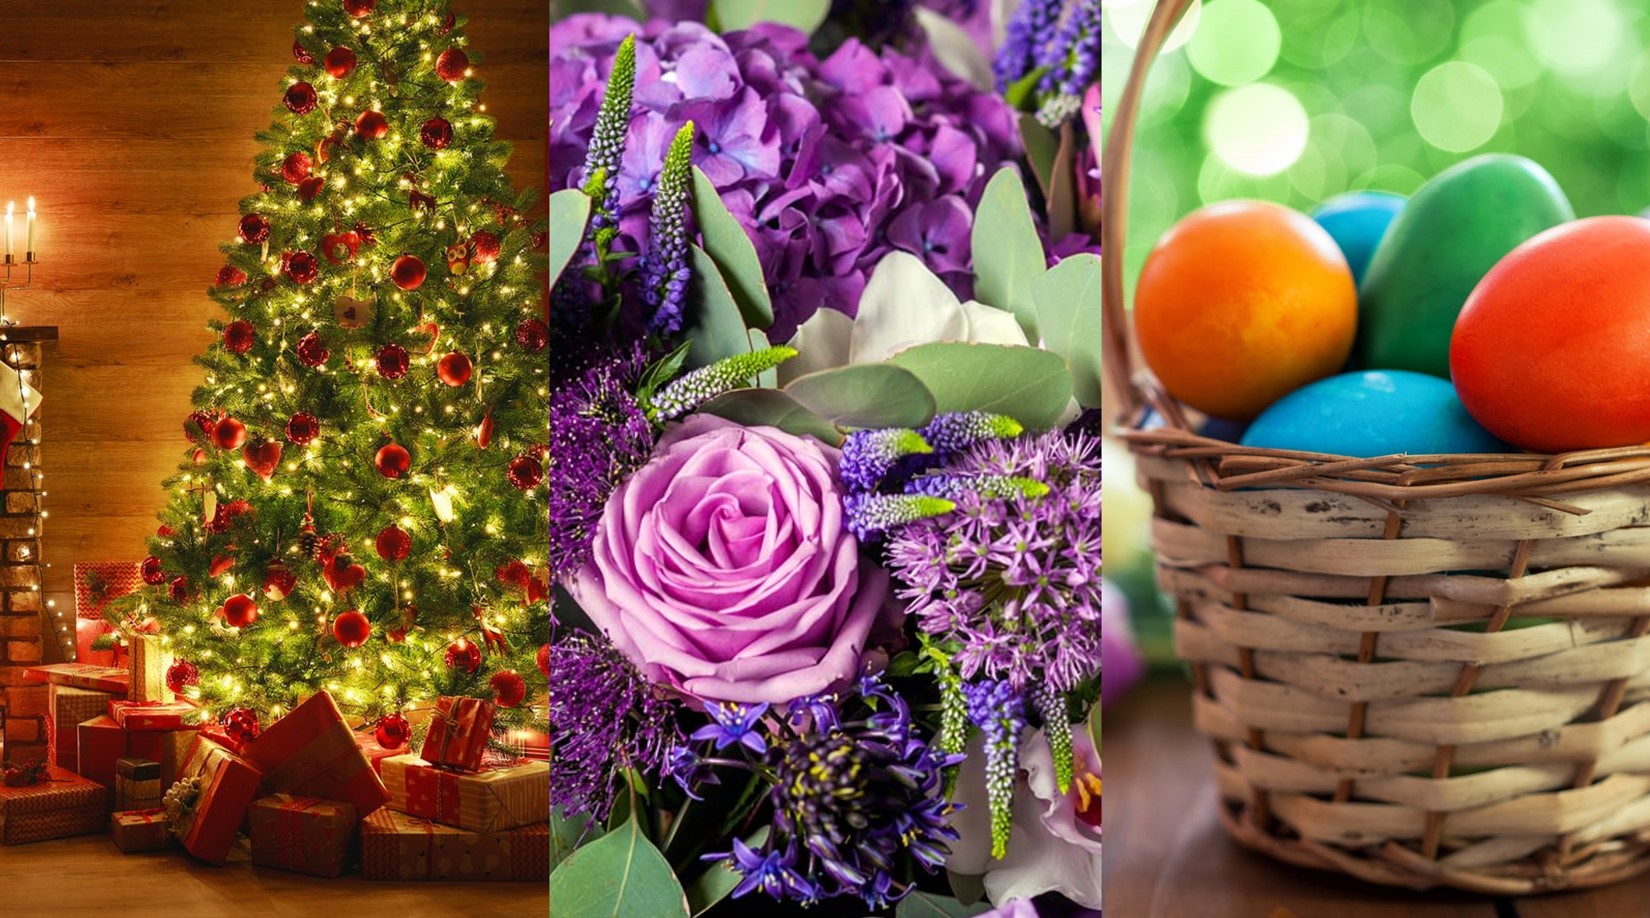 the top three church holidays are Christmas, Ester, and Mother's Day